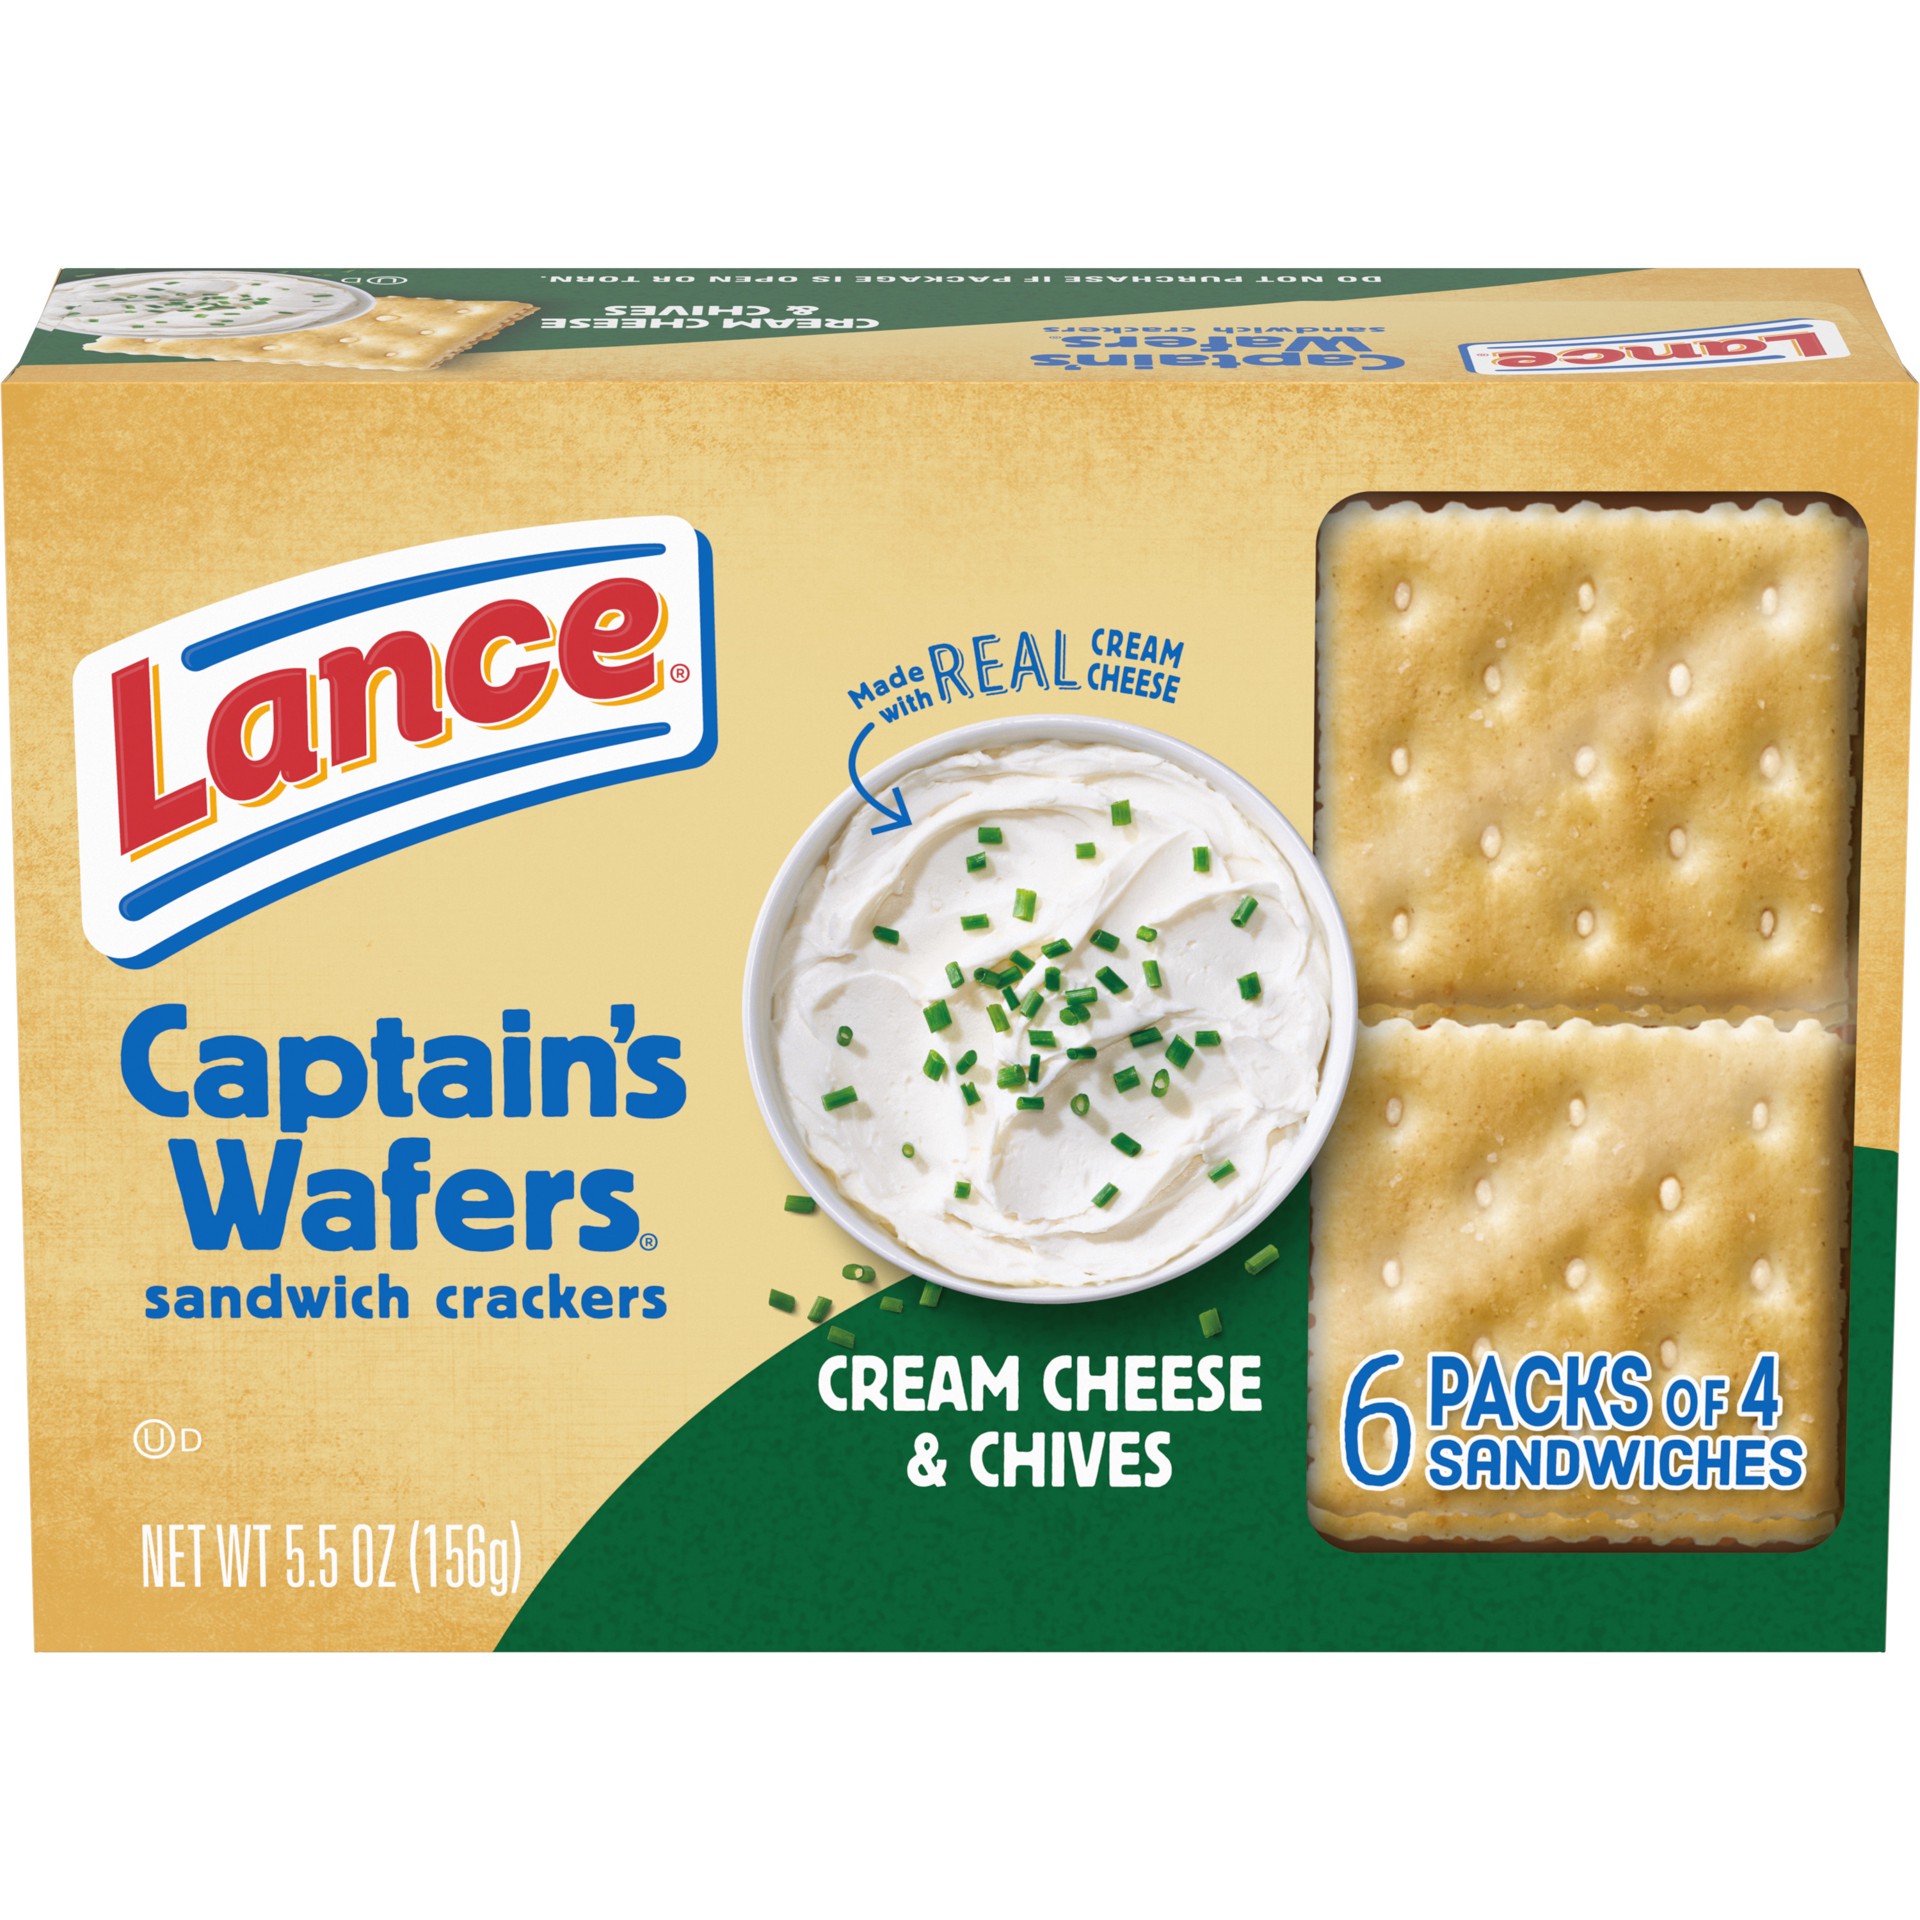 slide 1 of 11, Lance Sandwich Crackers, Captain's Wafers Cream Cheese and Chives, 6 Packs, 4 Sandwiches Each, 5.5 oz